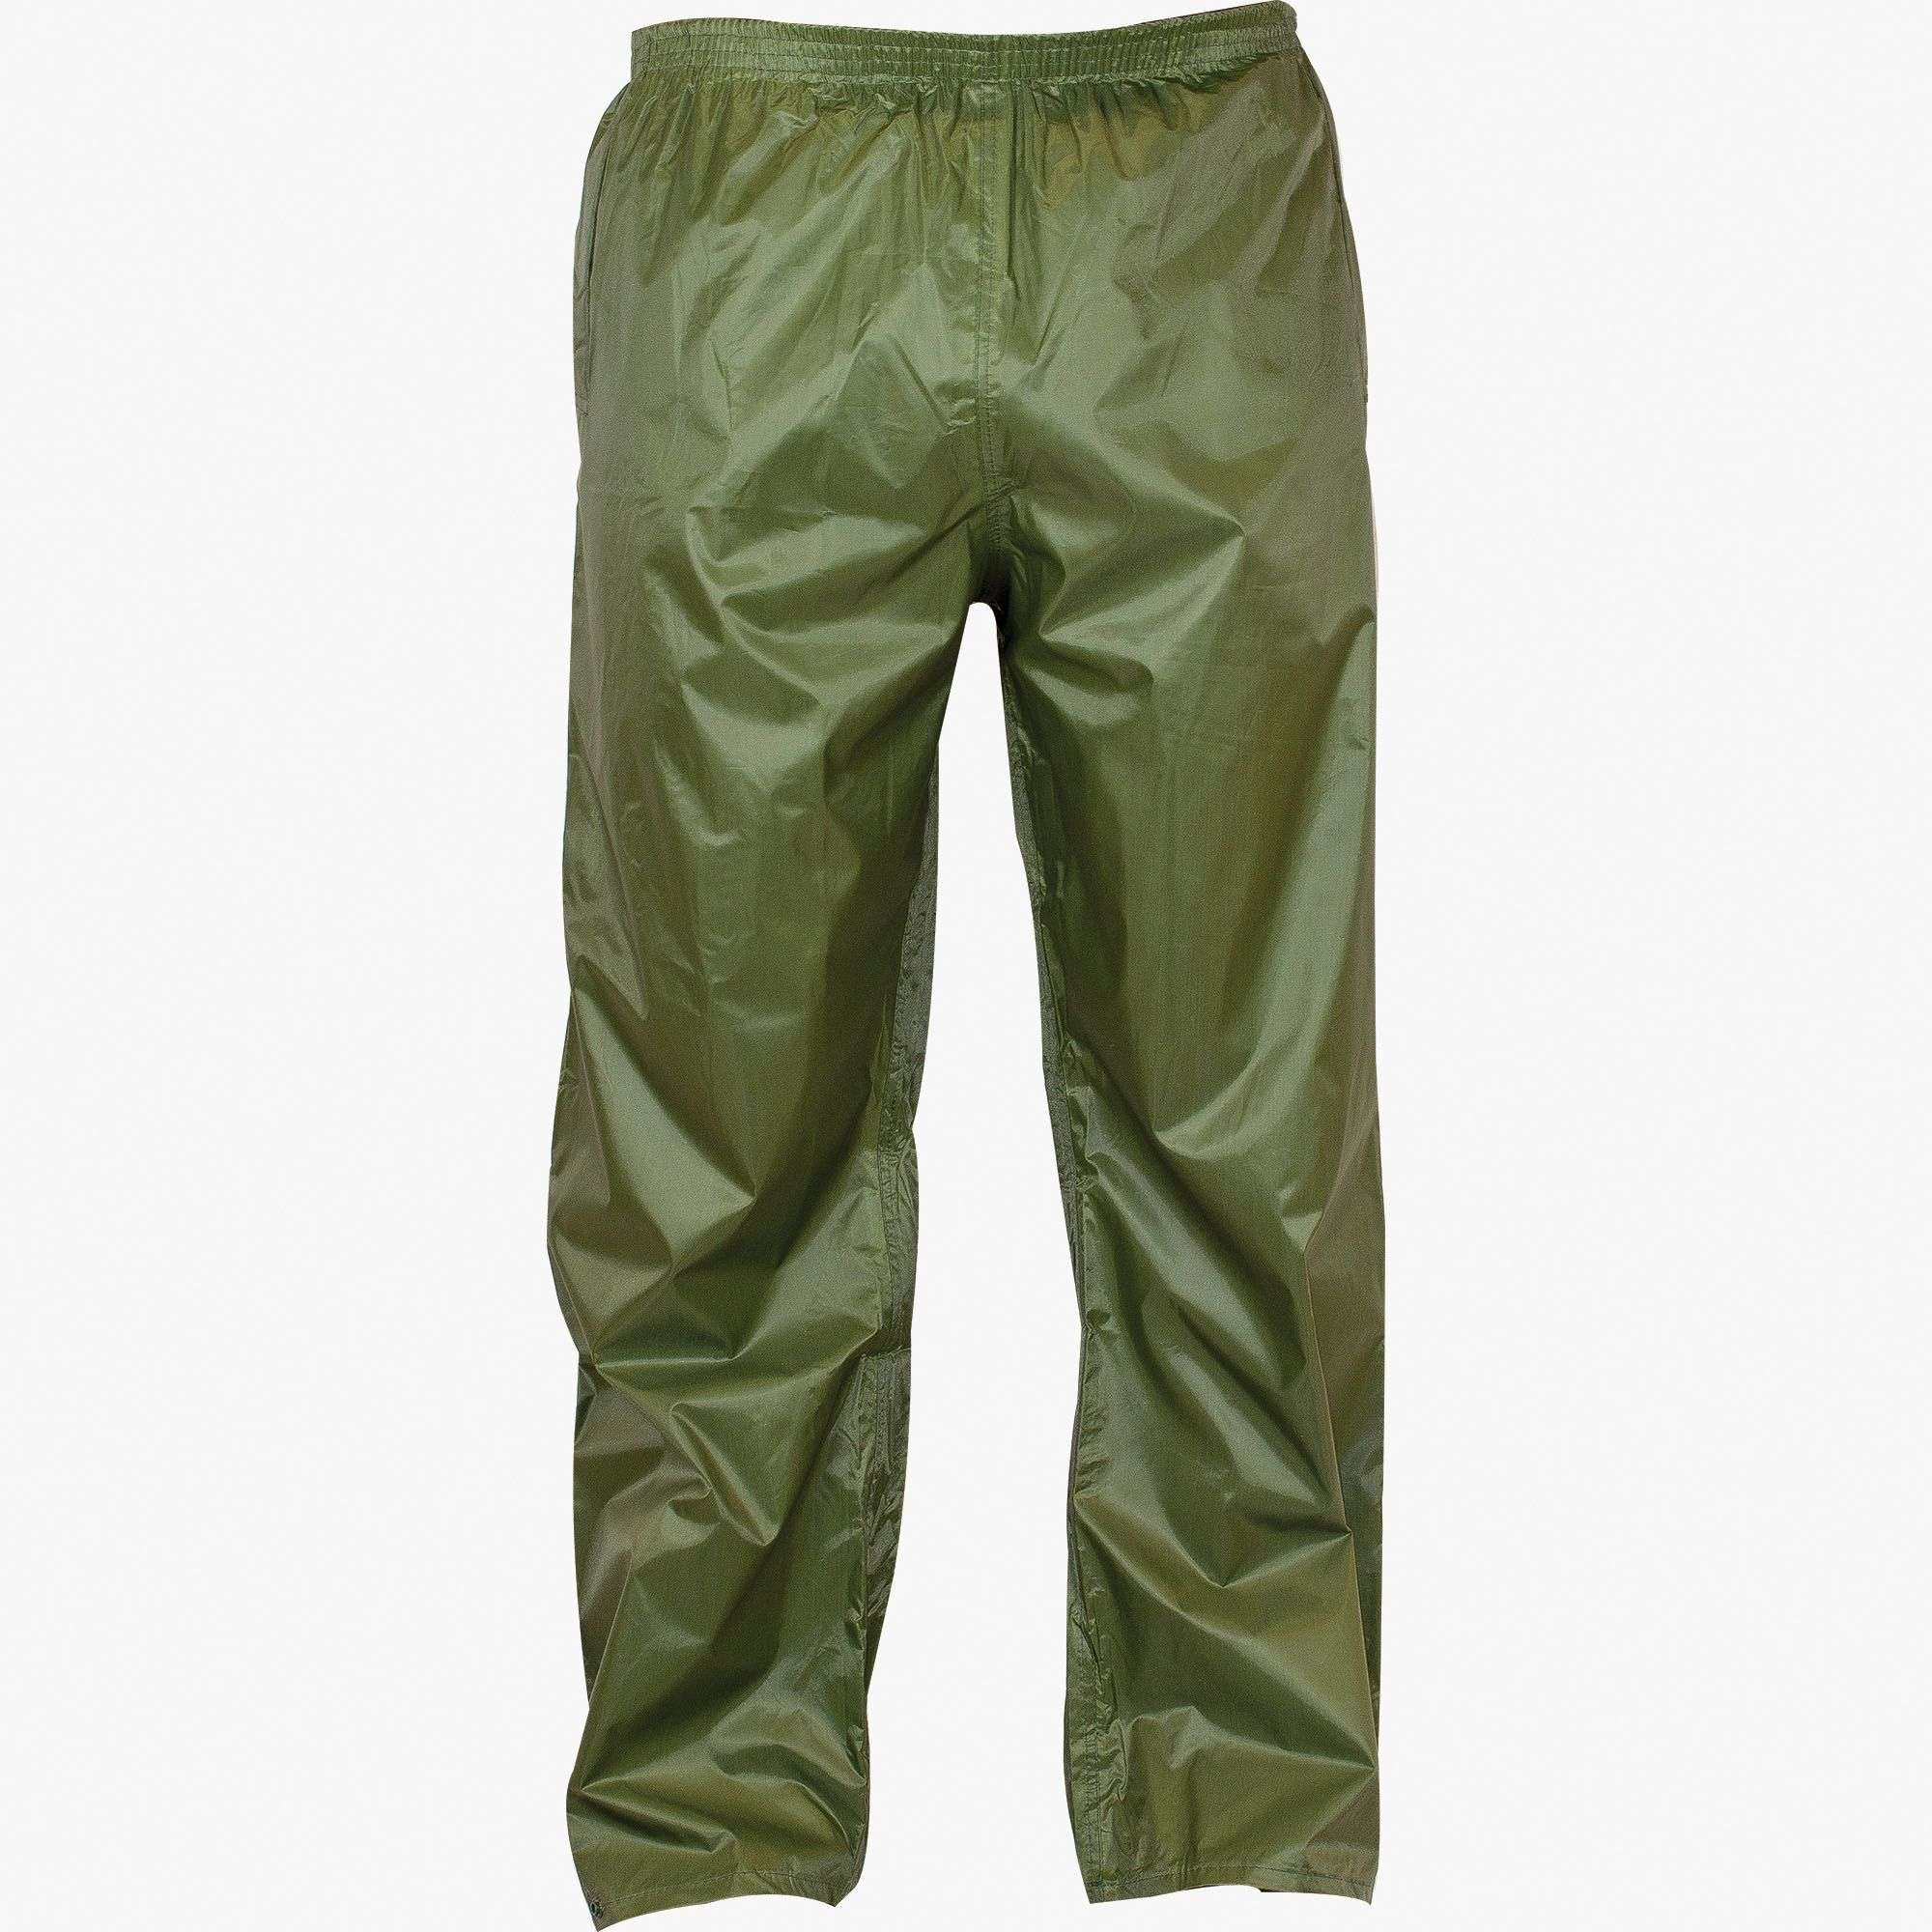 Highlander, Highlander - Stormguard Trousers, Trousers & Shorts,Wylies Outdoor World,